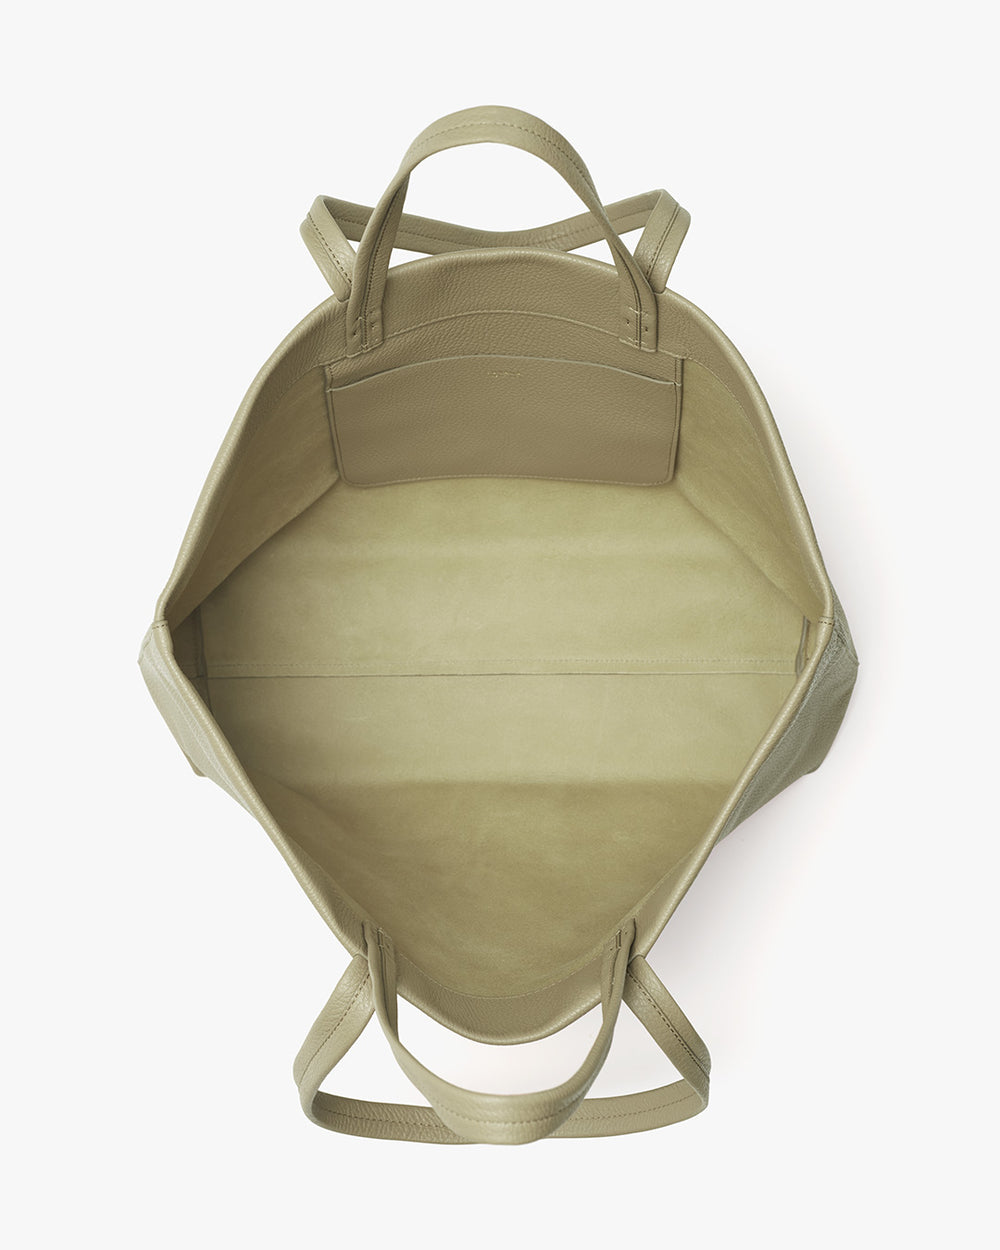 Open tote bag with handles viewed from above.